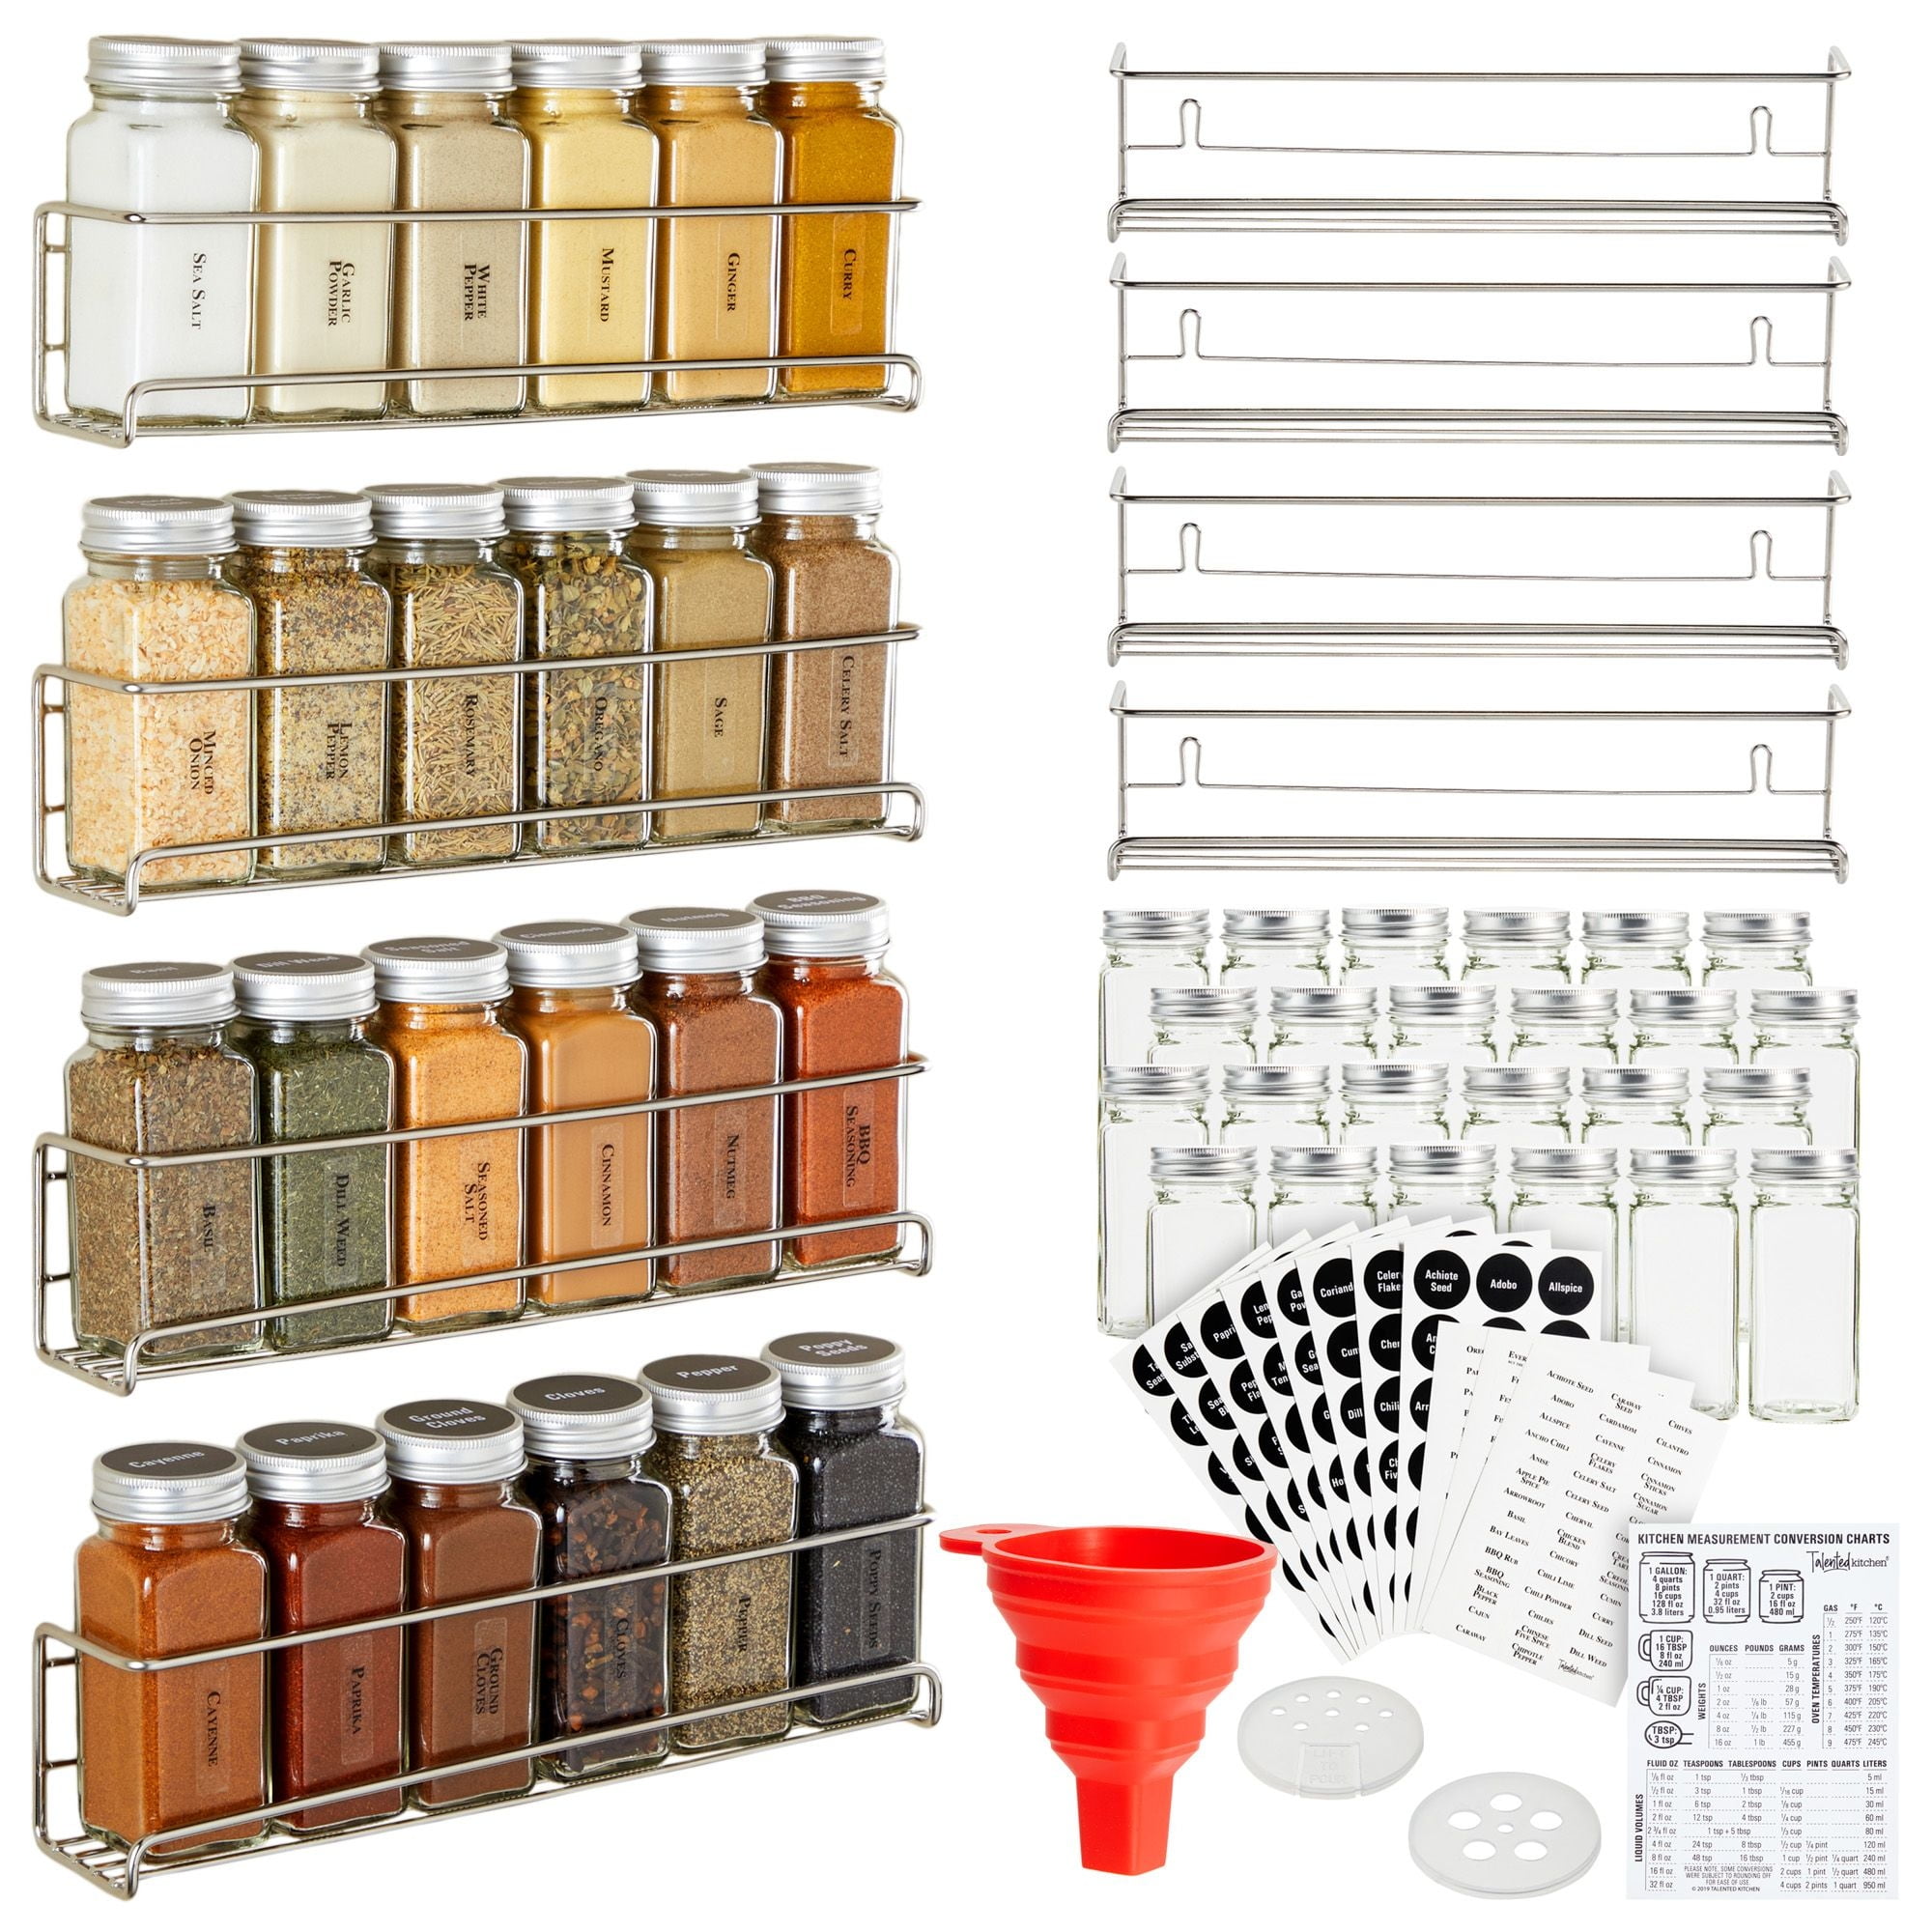  AOZITA 4 Pack Spice Rack with Jars, 25 Glass Spice Jars,  Hanging Spice Rack for Cabinet, Space Saving Rustic Wood Floating Shelves -  Spice Labels Chalk Marker and Silicone Collapsible Funnel